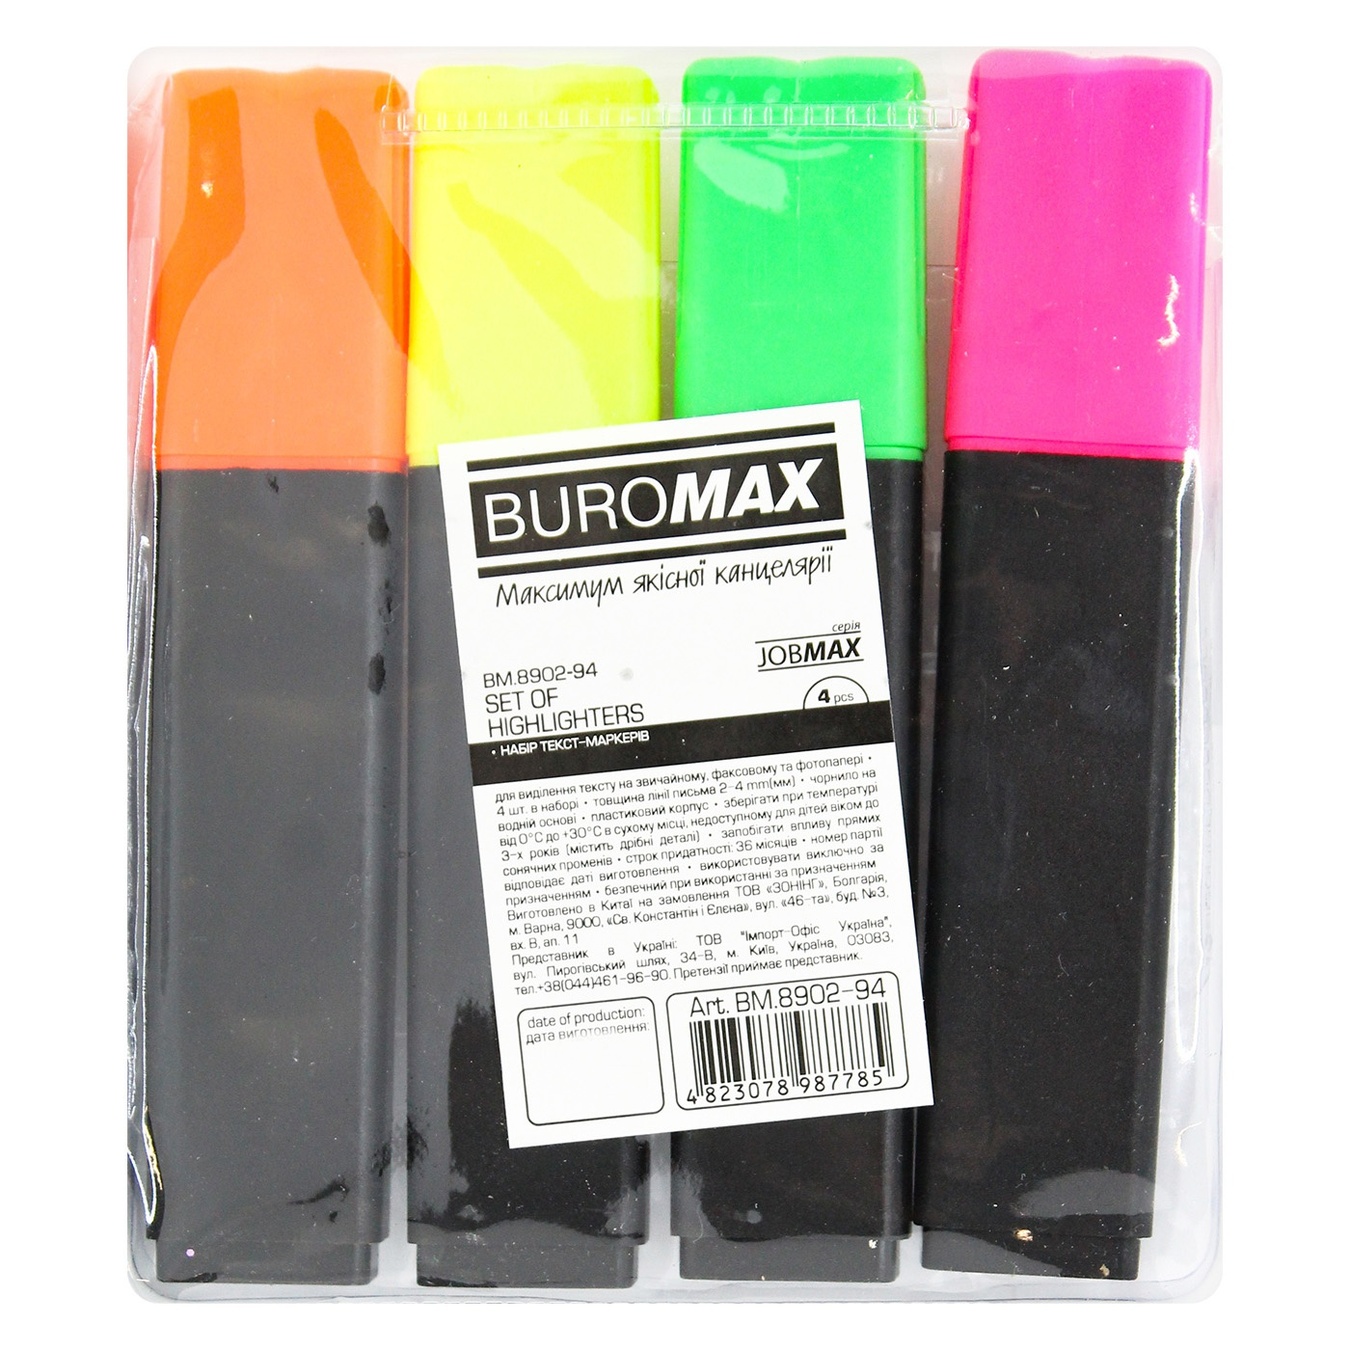 Set of color text markers Buromax Jobmax water base 2-4 mm 4pcs